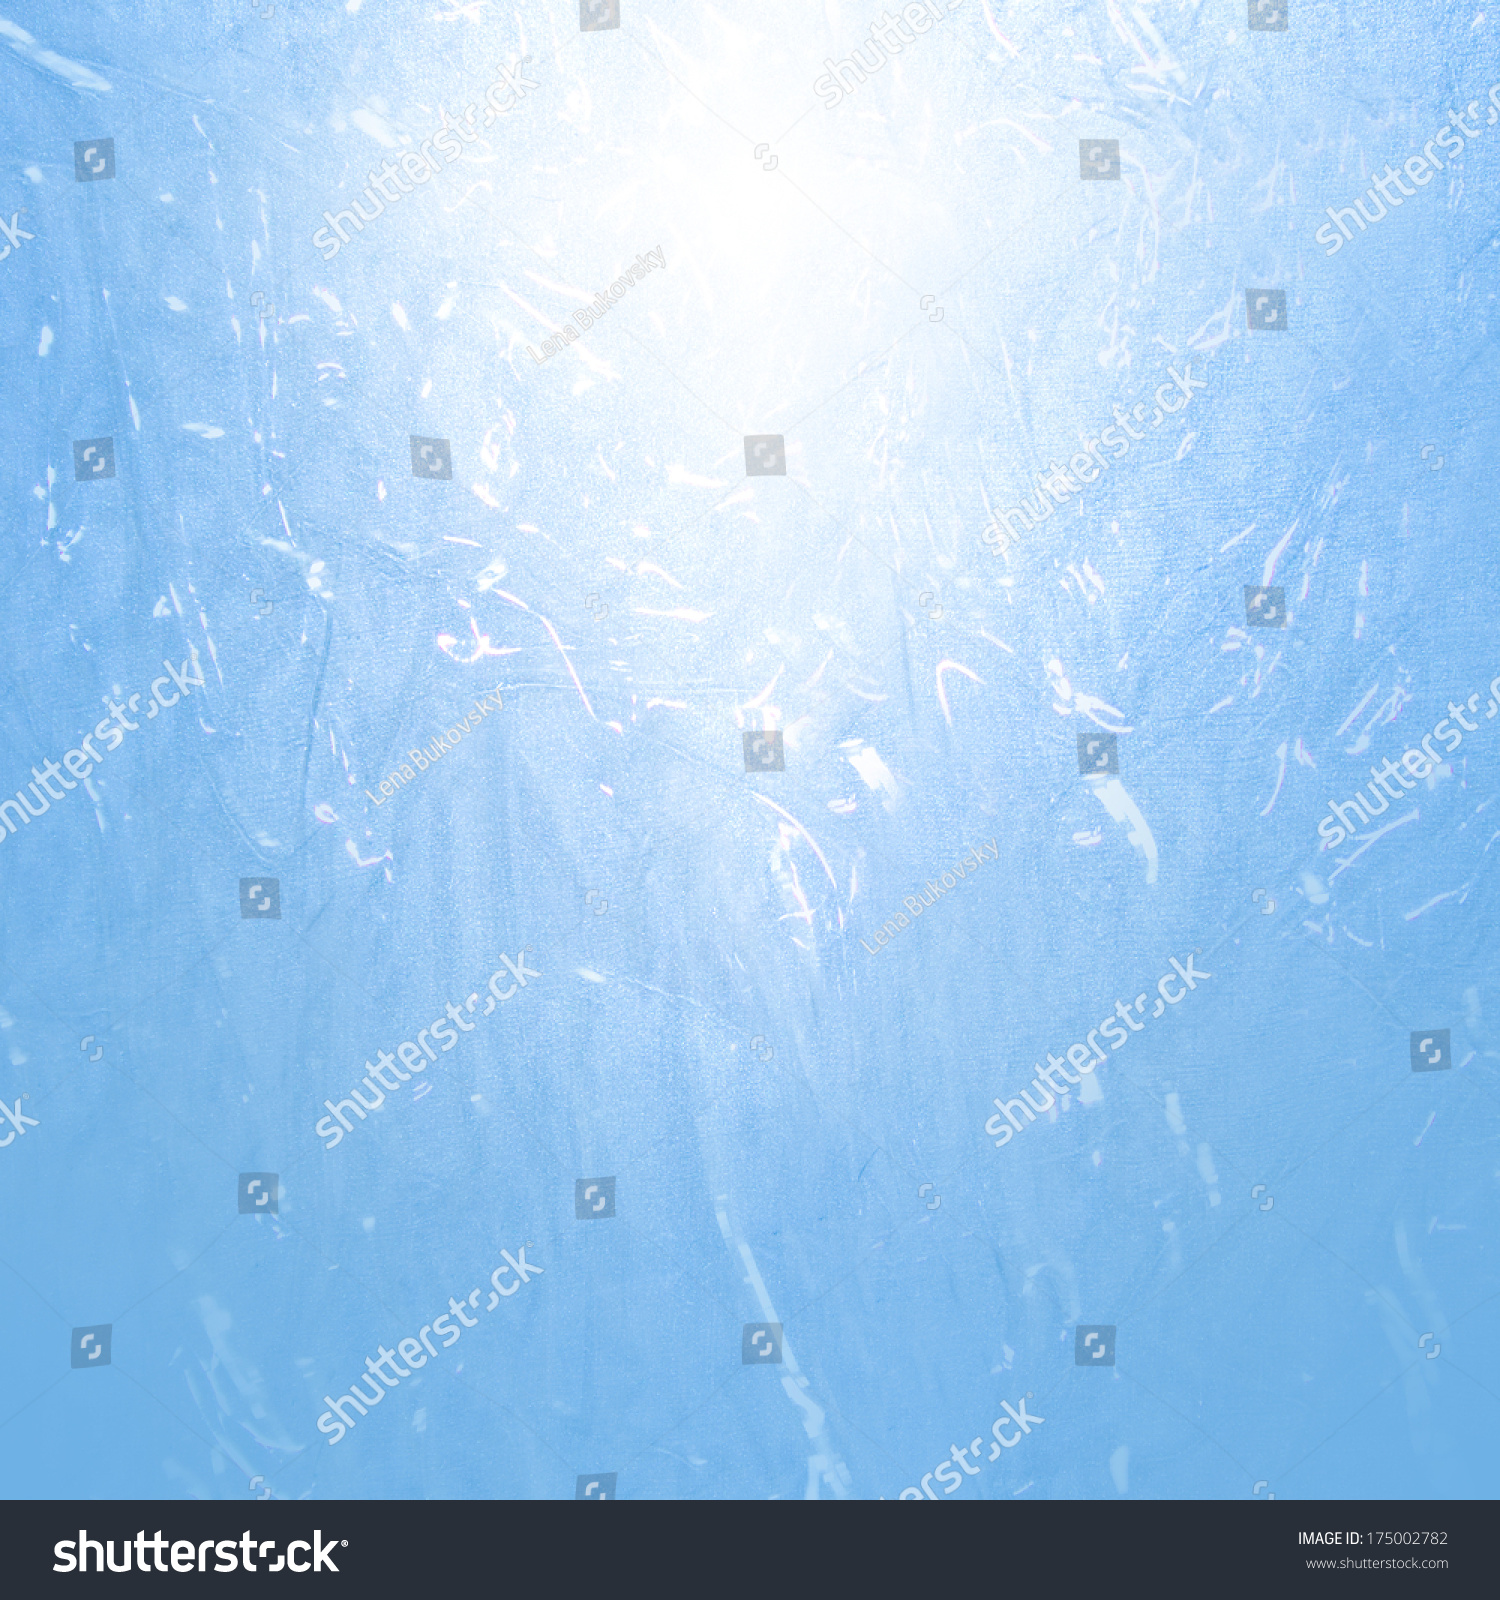 Blue Abstract Background Frozen Water Texture Stock Illustration ...